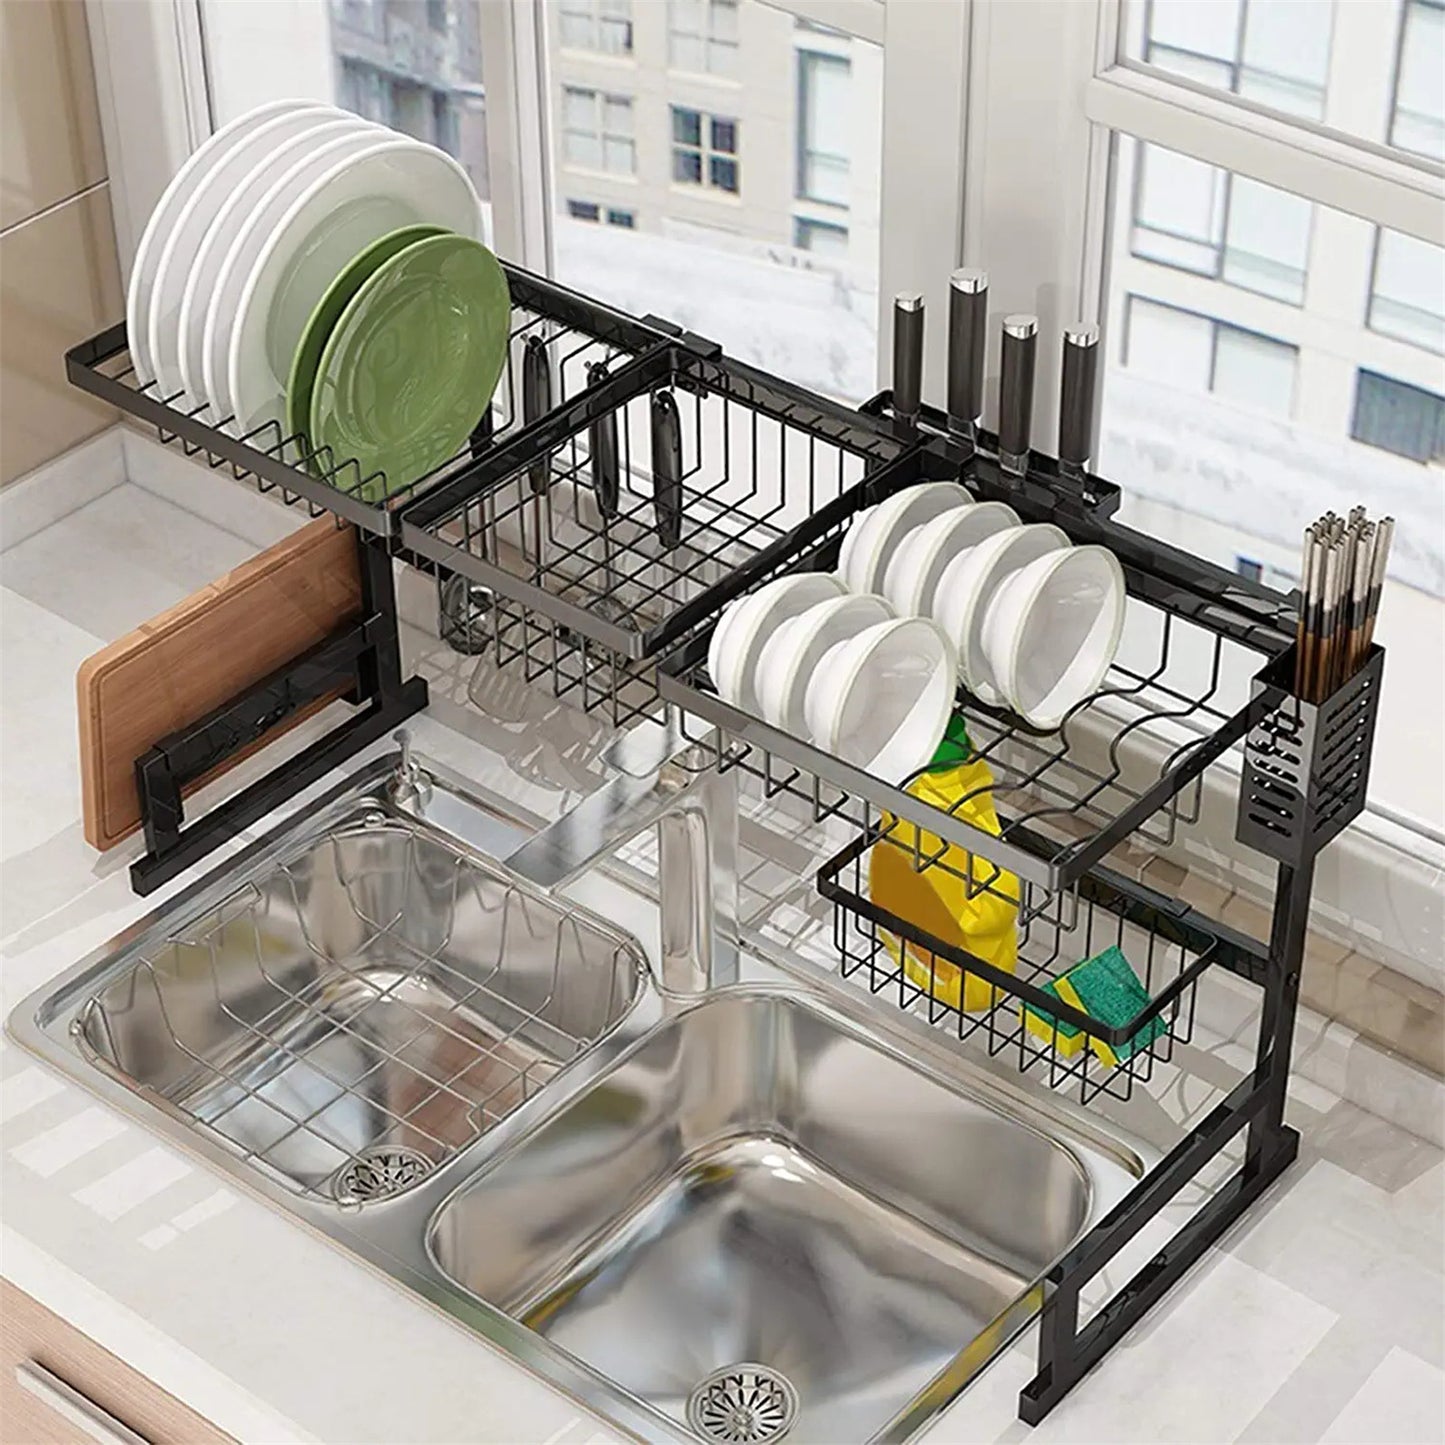 Over The Sink Dish Drying Rack 33.5 Inches Kitchen Sink Organizer Storage Rack For Organizer Home Kitchen Counter Space Saver